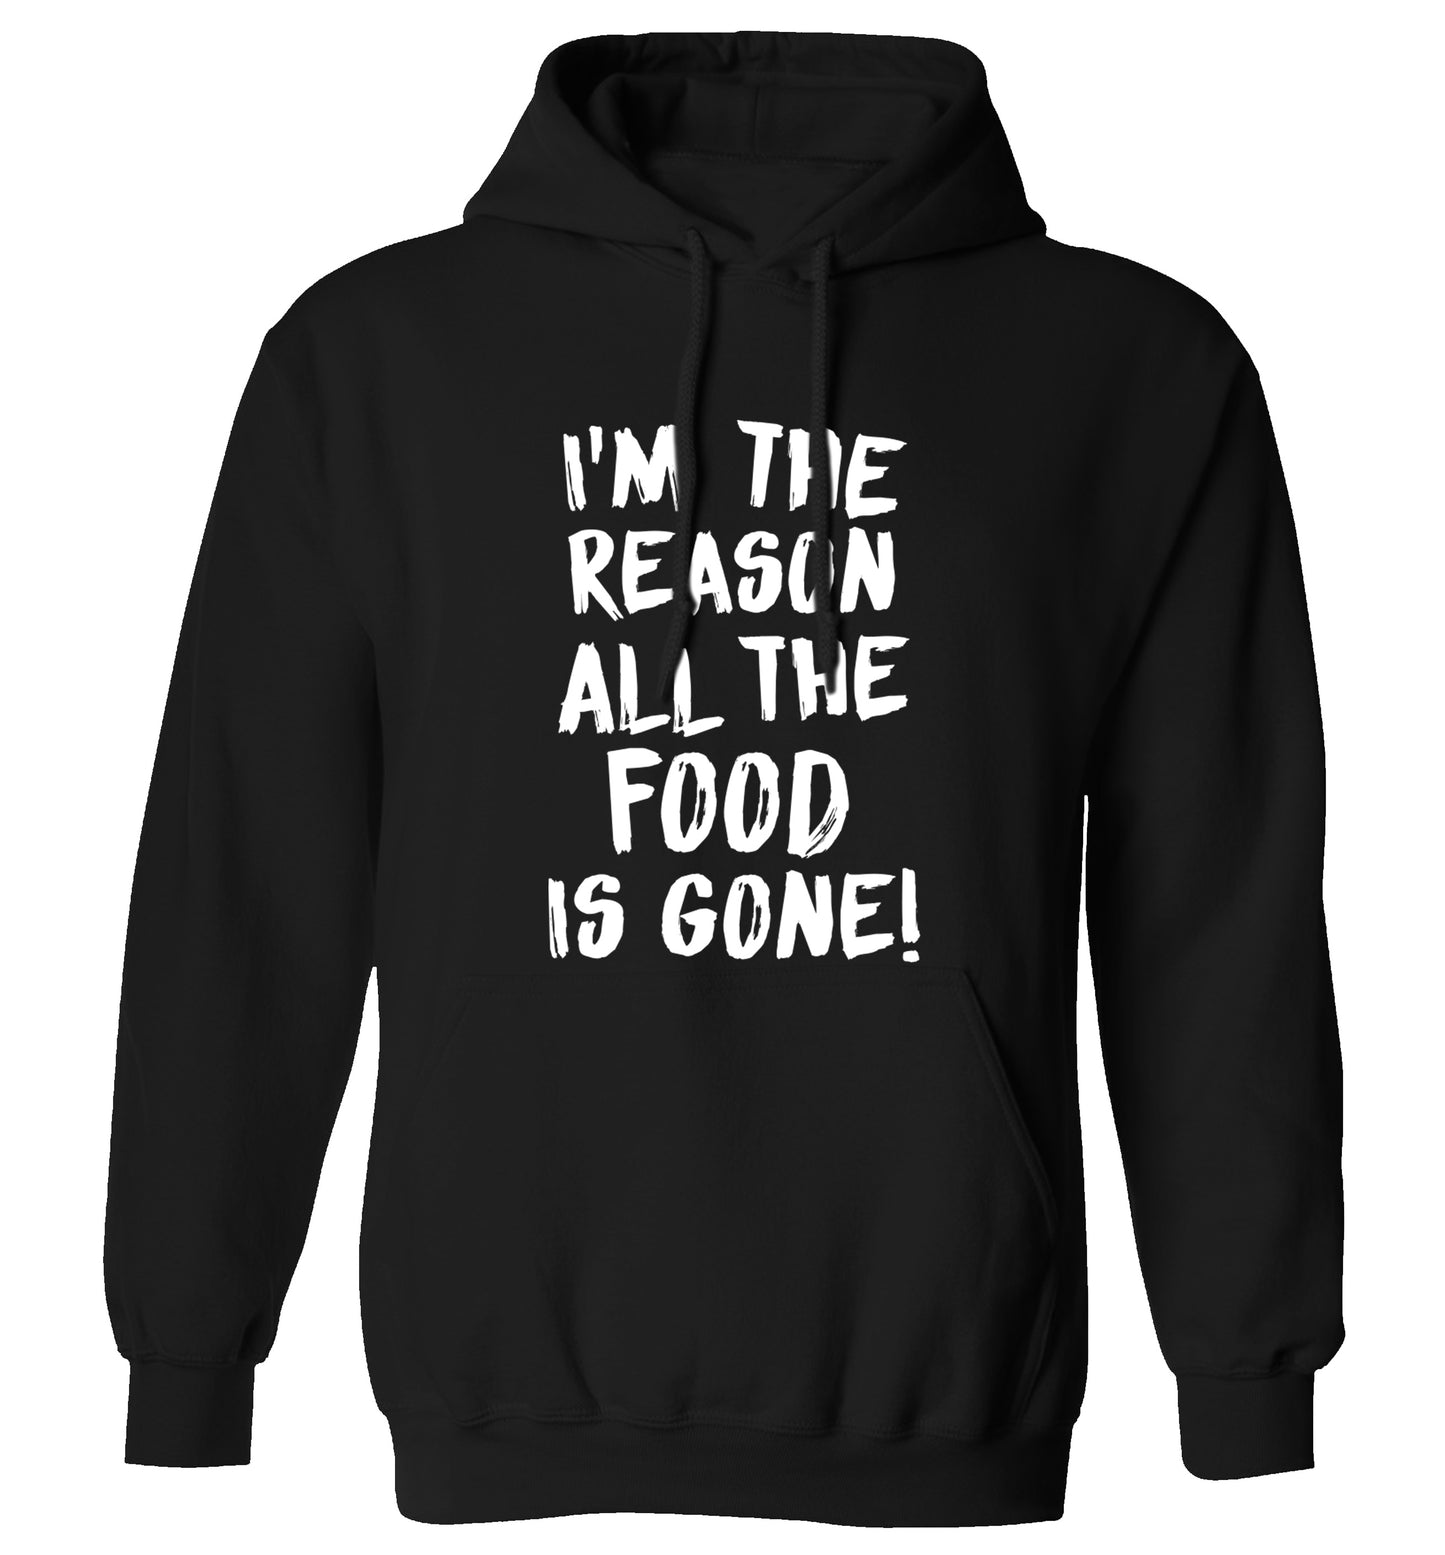 I'm the reason why all the food is gone adults unisex black hoodie 2XL